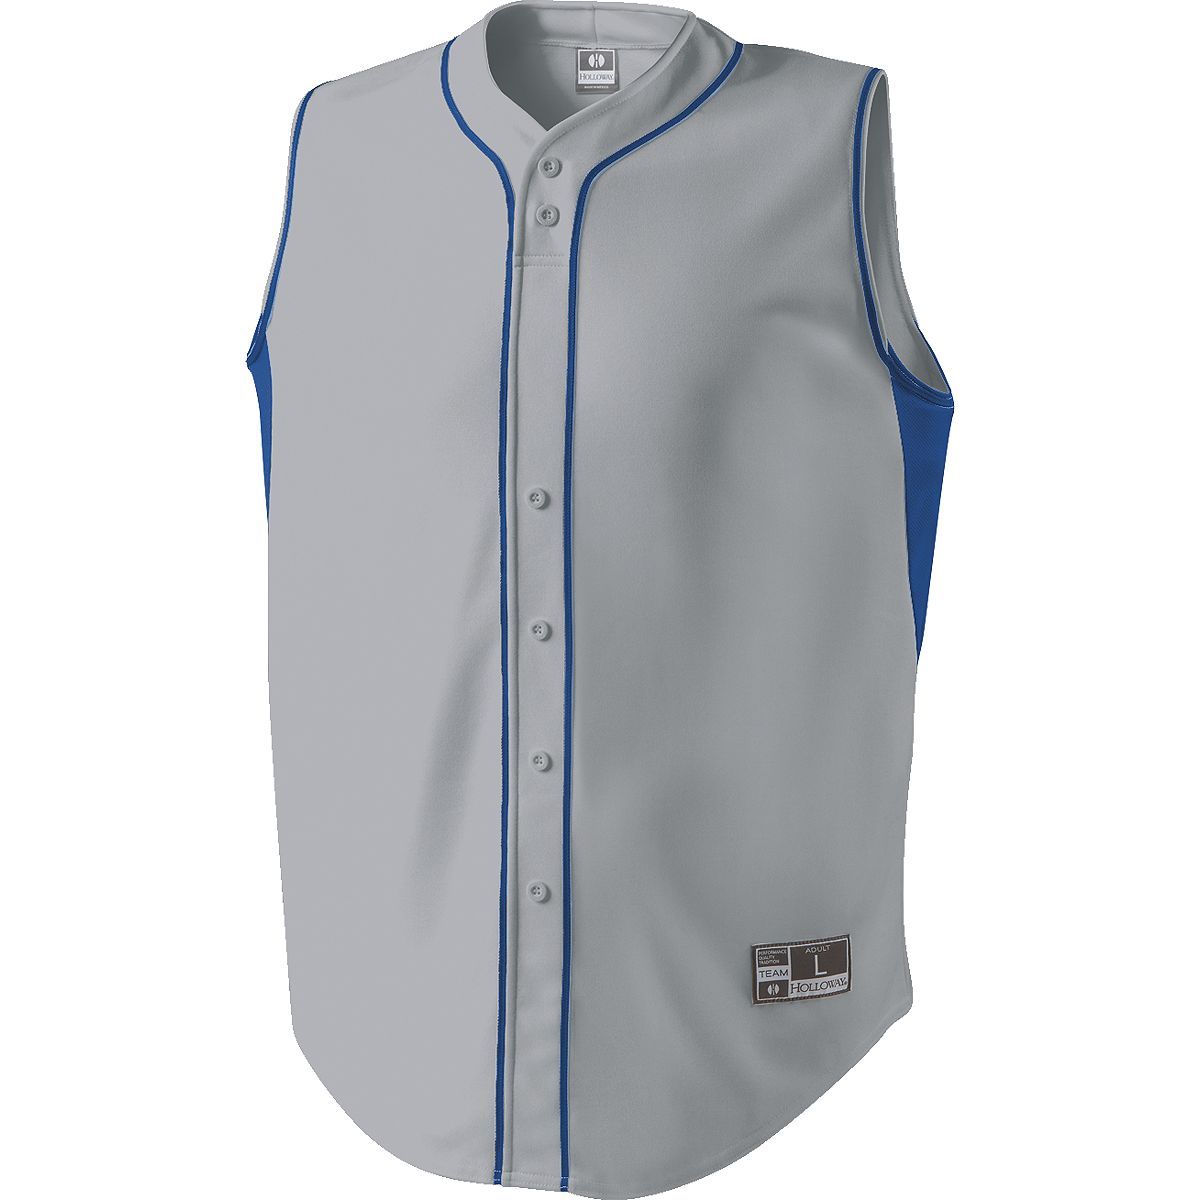 Holloway Fierce Jersey in Blue Grey/Royal  -Part of the Adult, Adult-Jersey, Baseball, Holloway, Shirts, All-Sports, All-Sports-1 product lines at KanaleyCreations.com